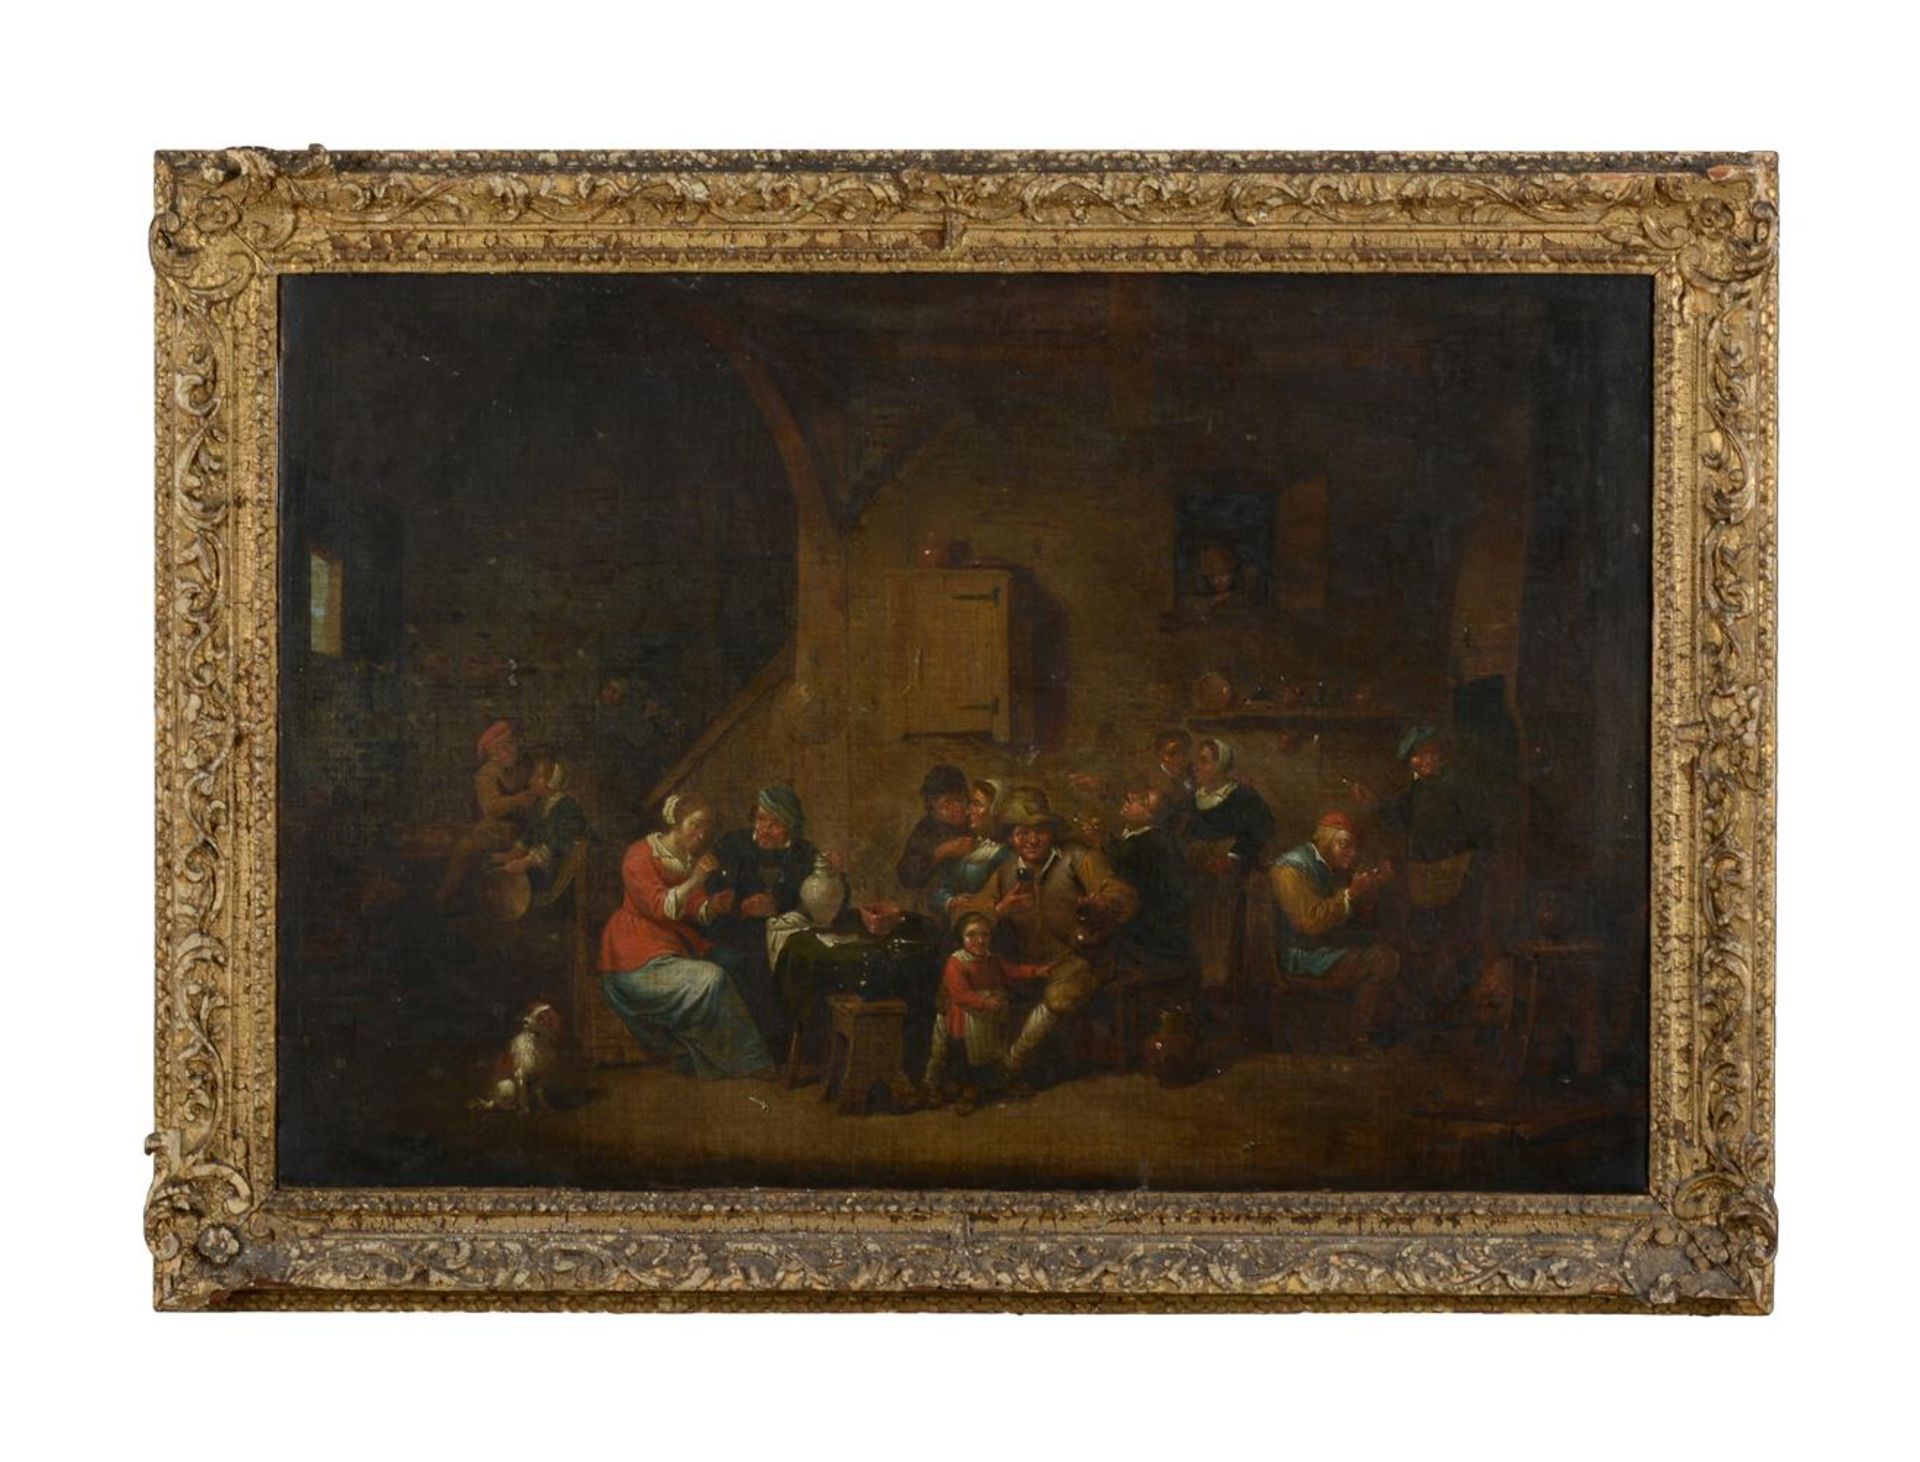 FOLLOWER OF DAVID TENIERS THE YOUNGER, DRINKING AND SMOKING COMPANY IN A TAVERN - Image 2 of 3